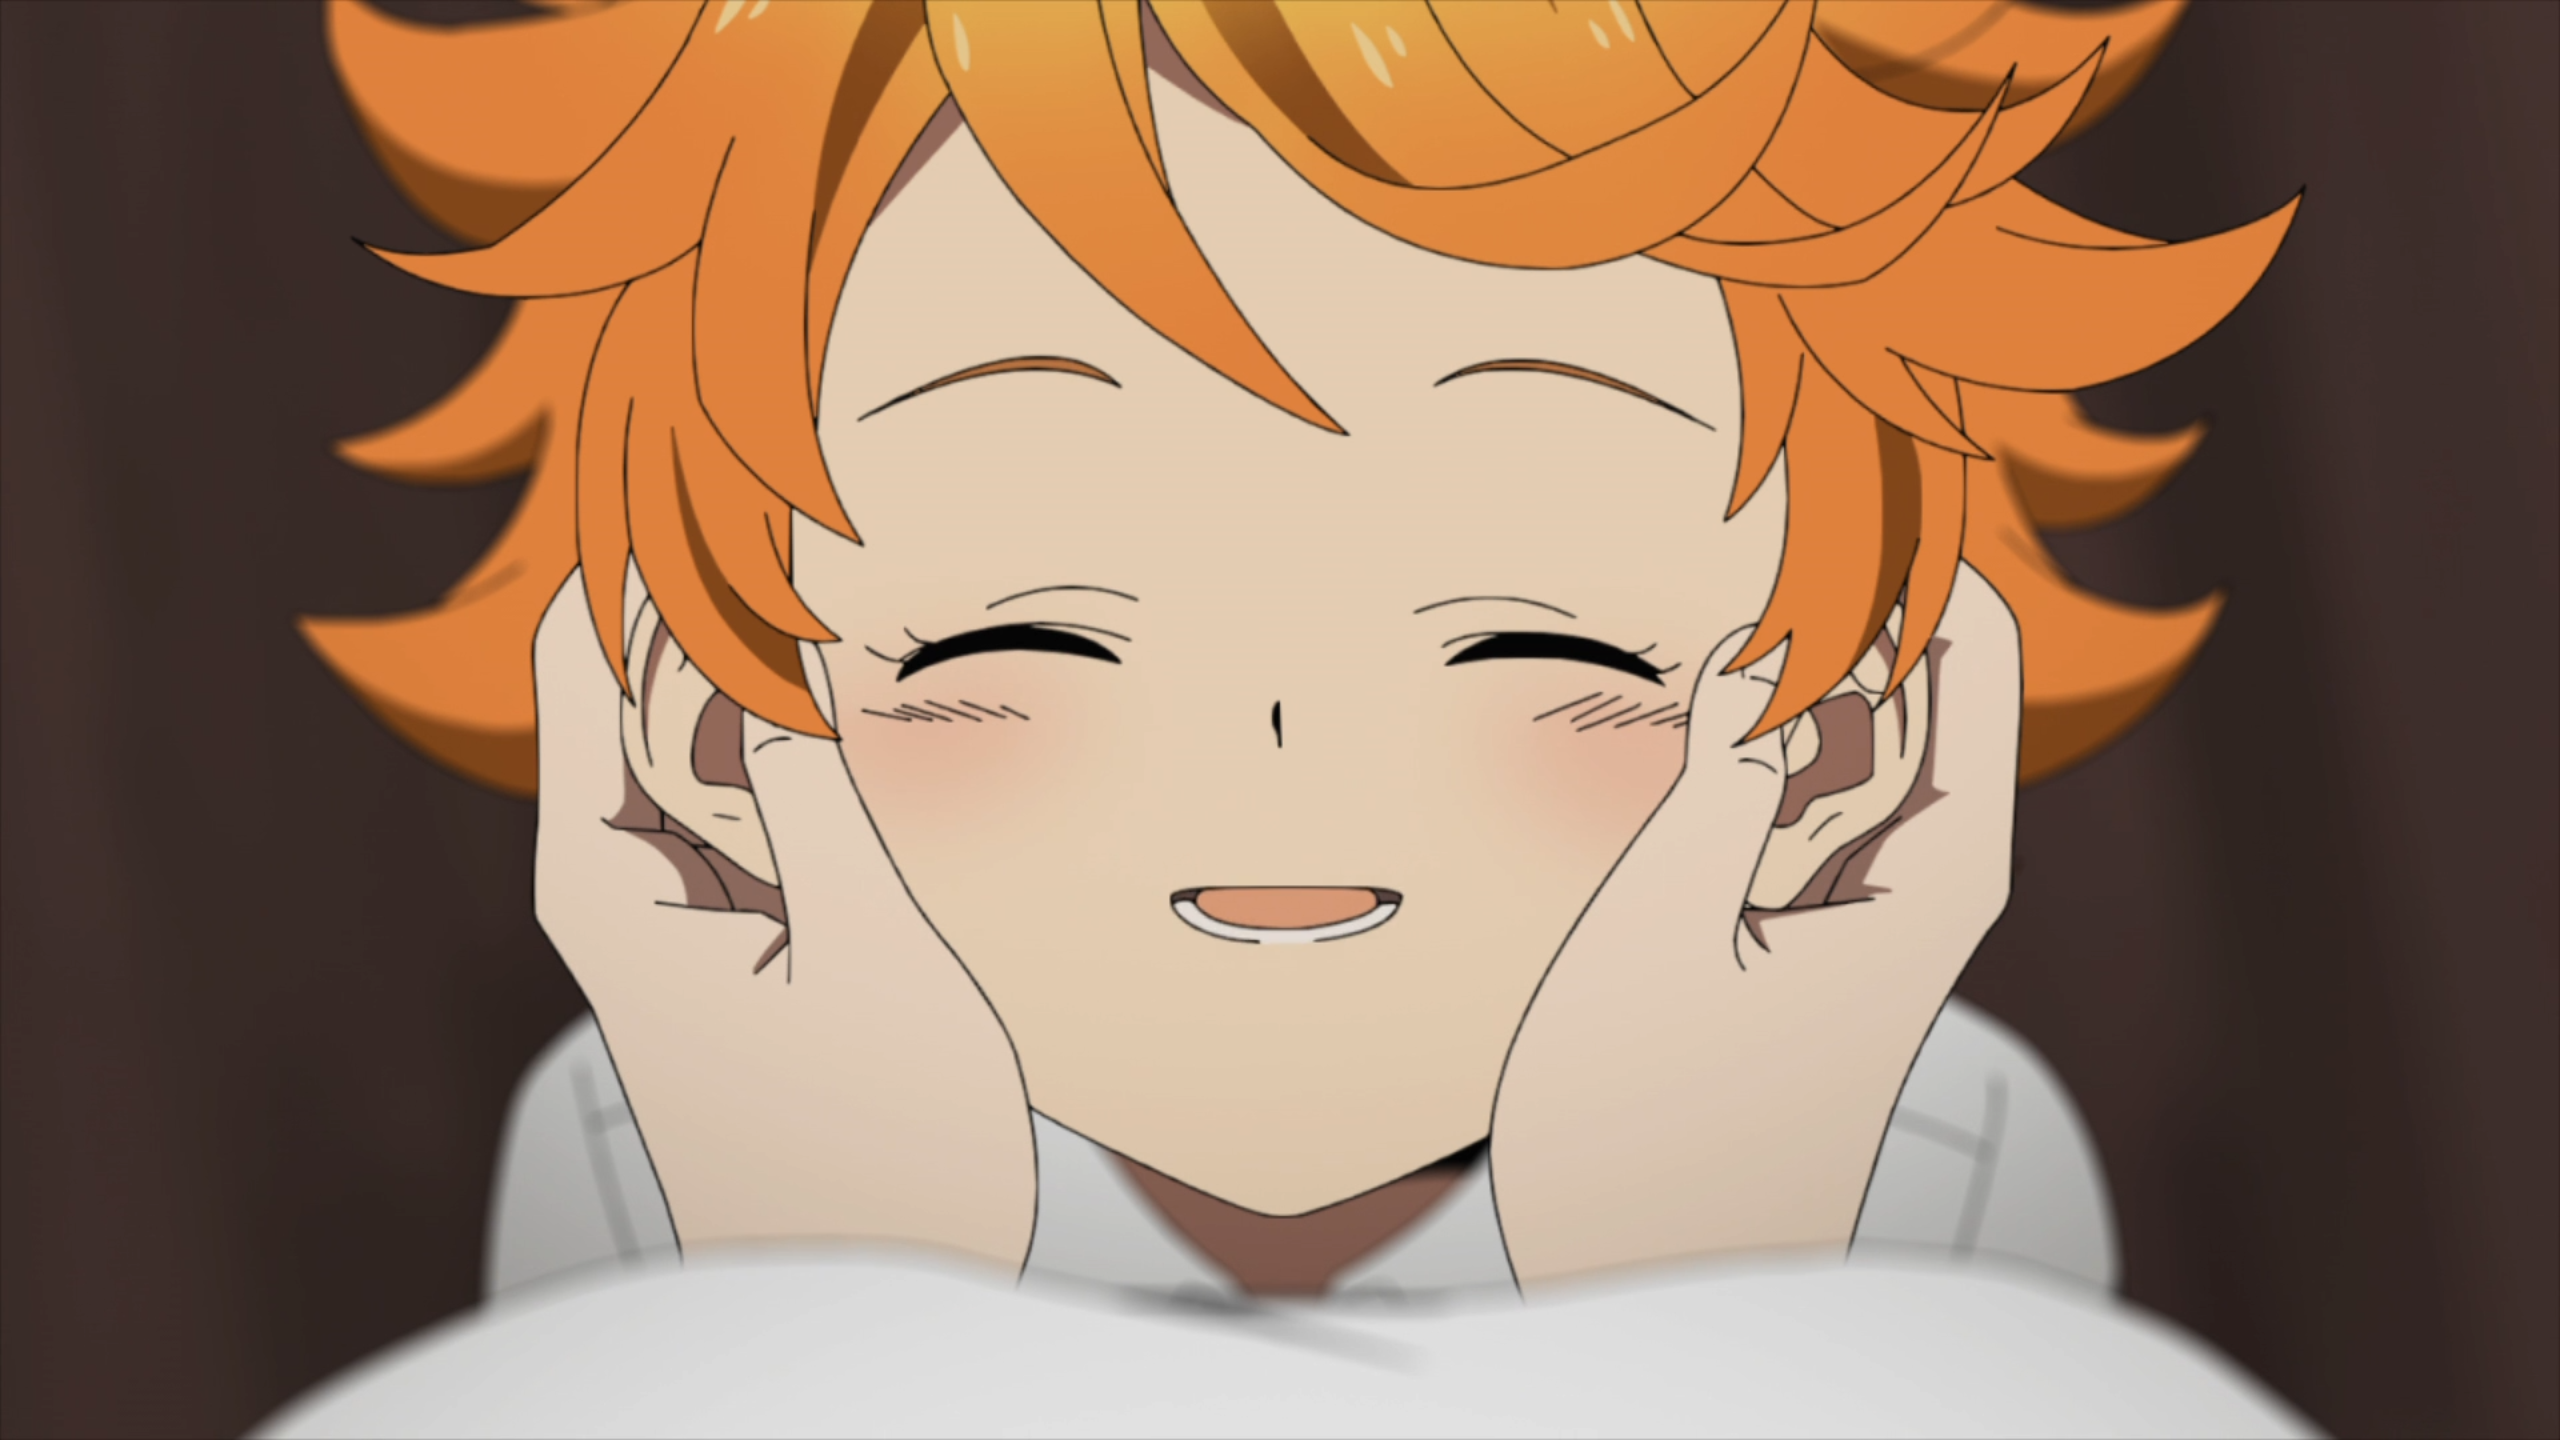 Emma The Promised Neverland Wallpapers.